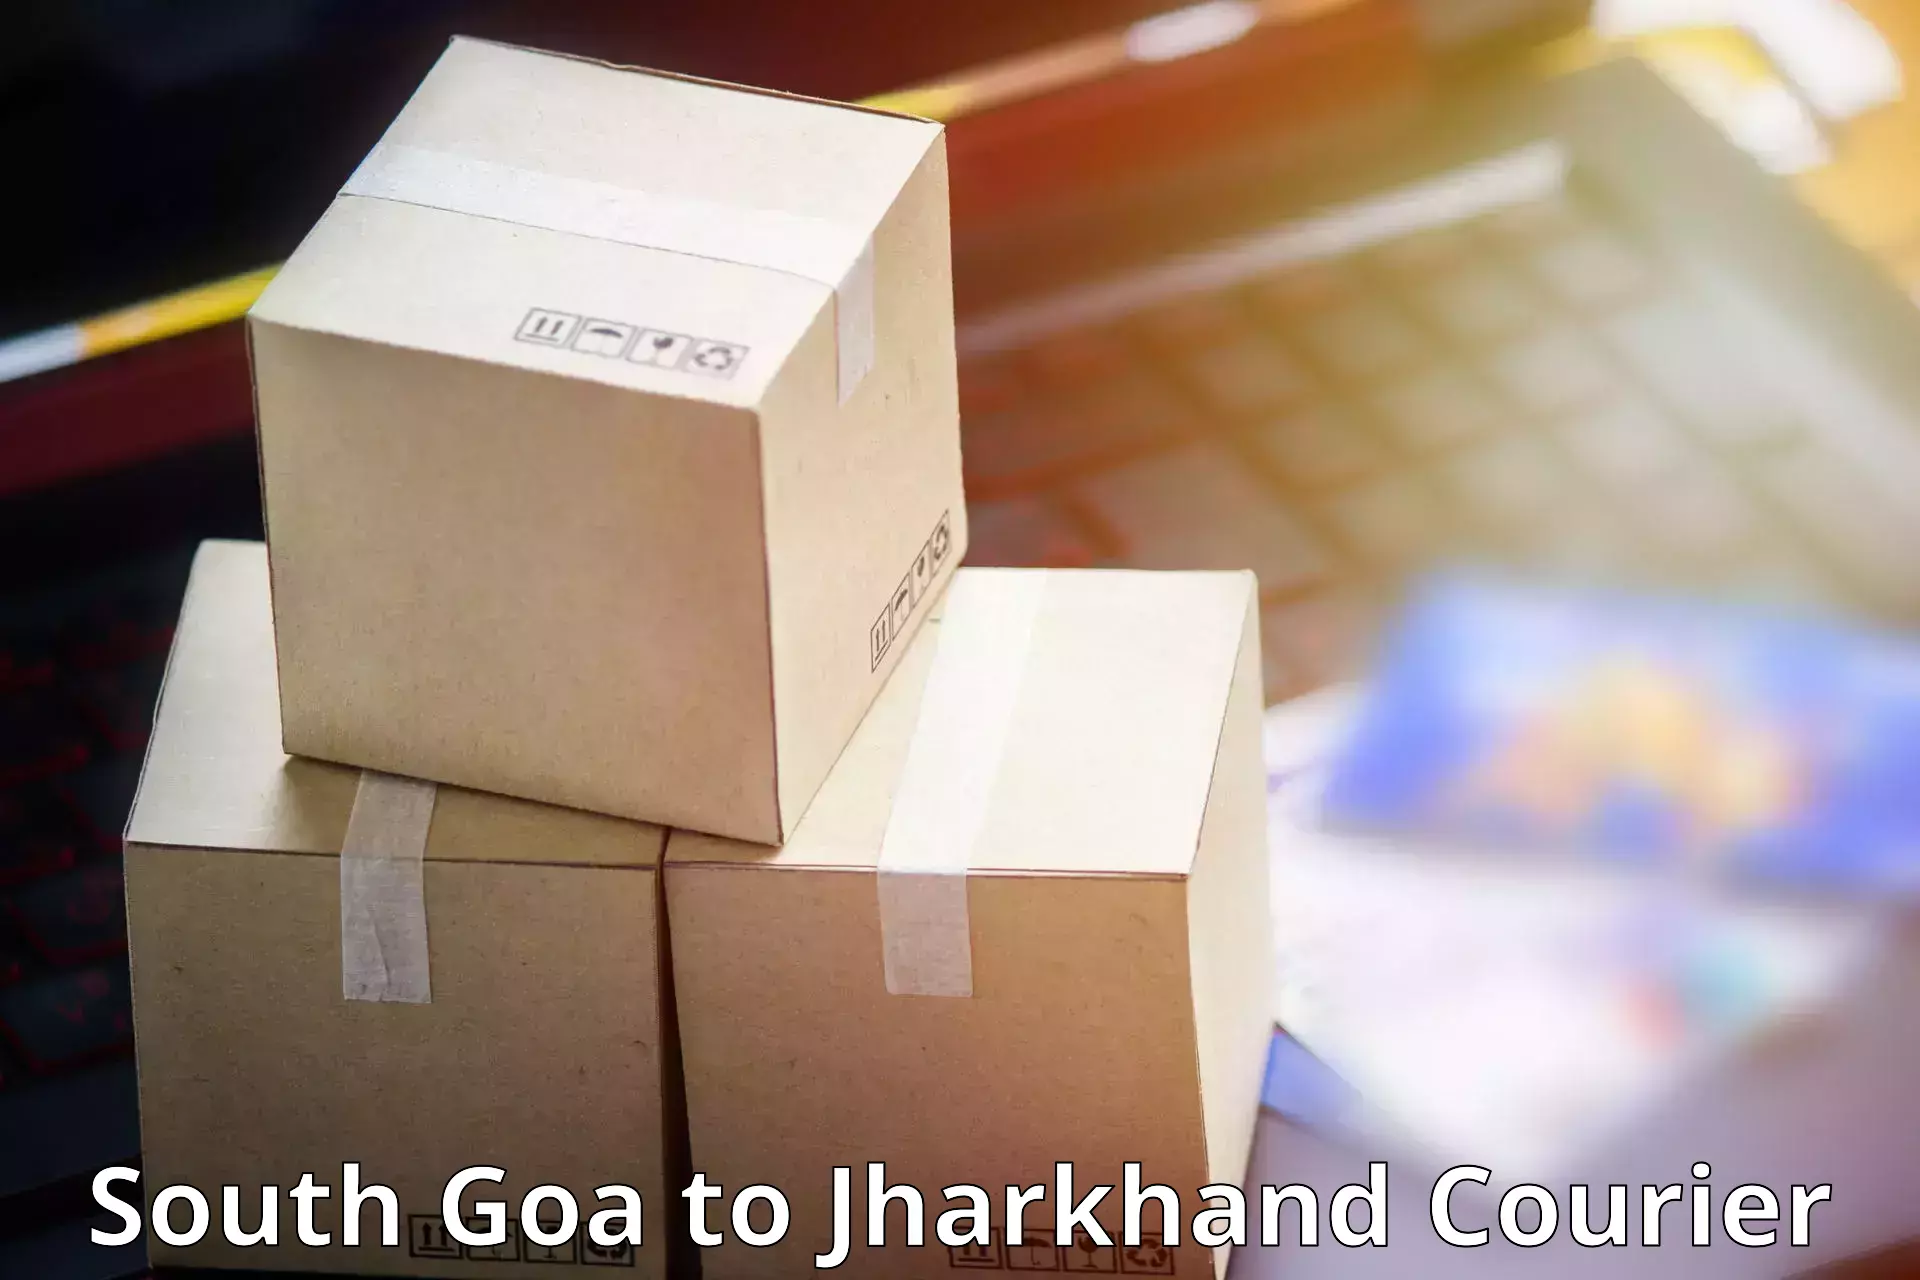 Multi-national courier services South Goa to Bara Boarijor